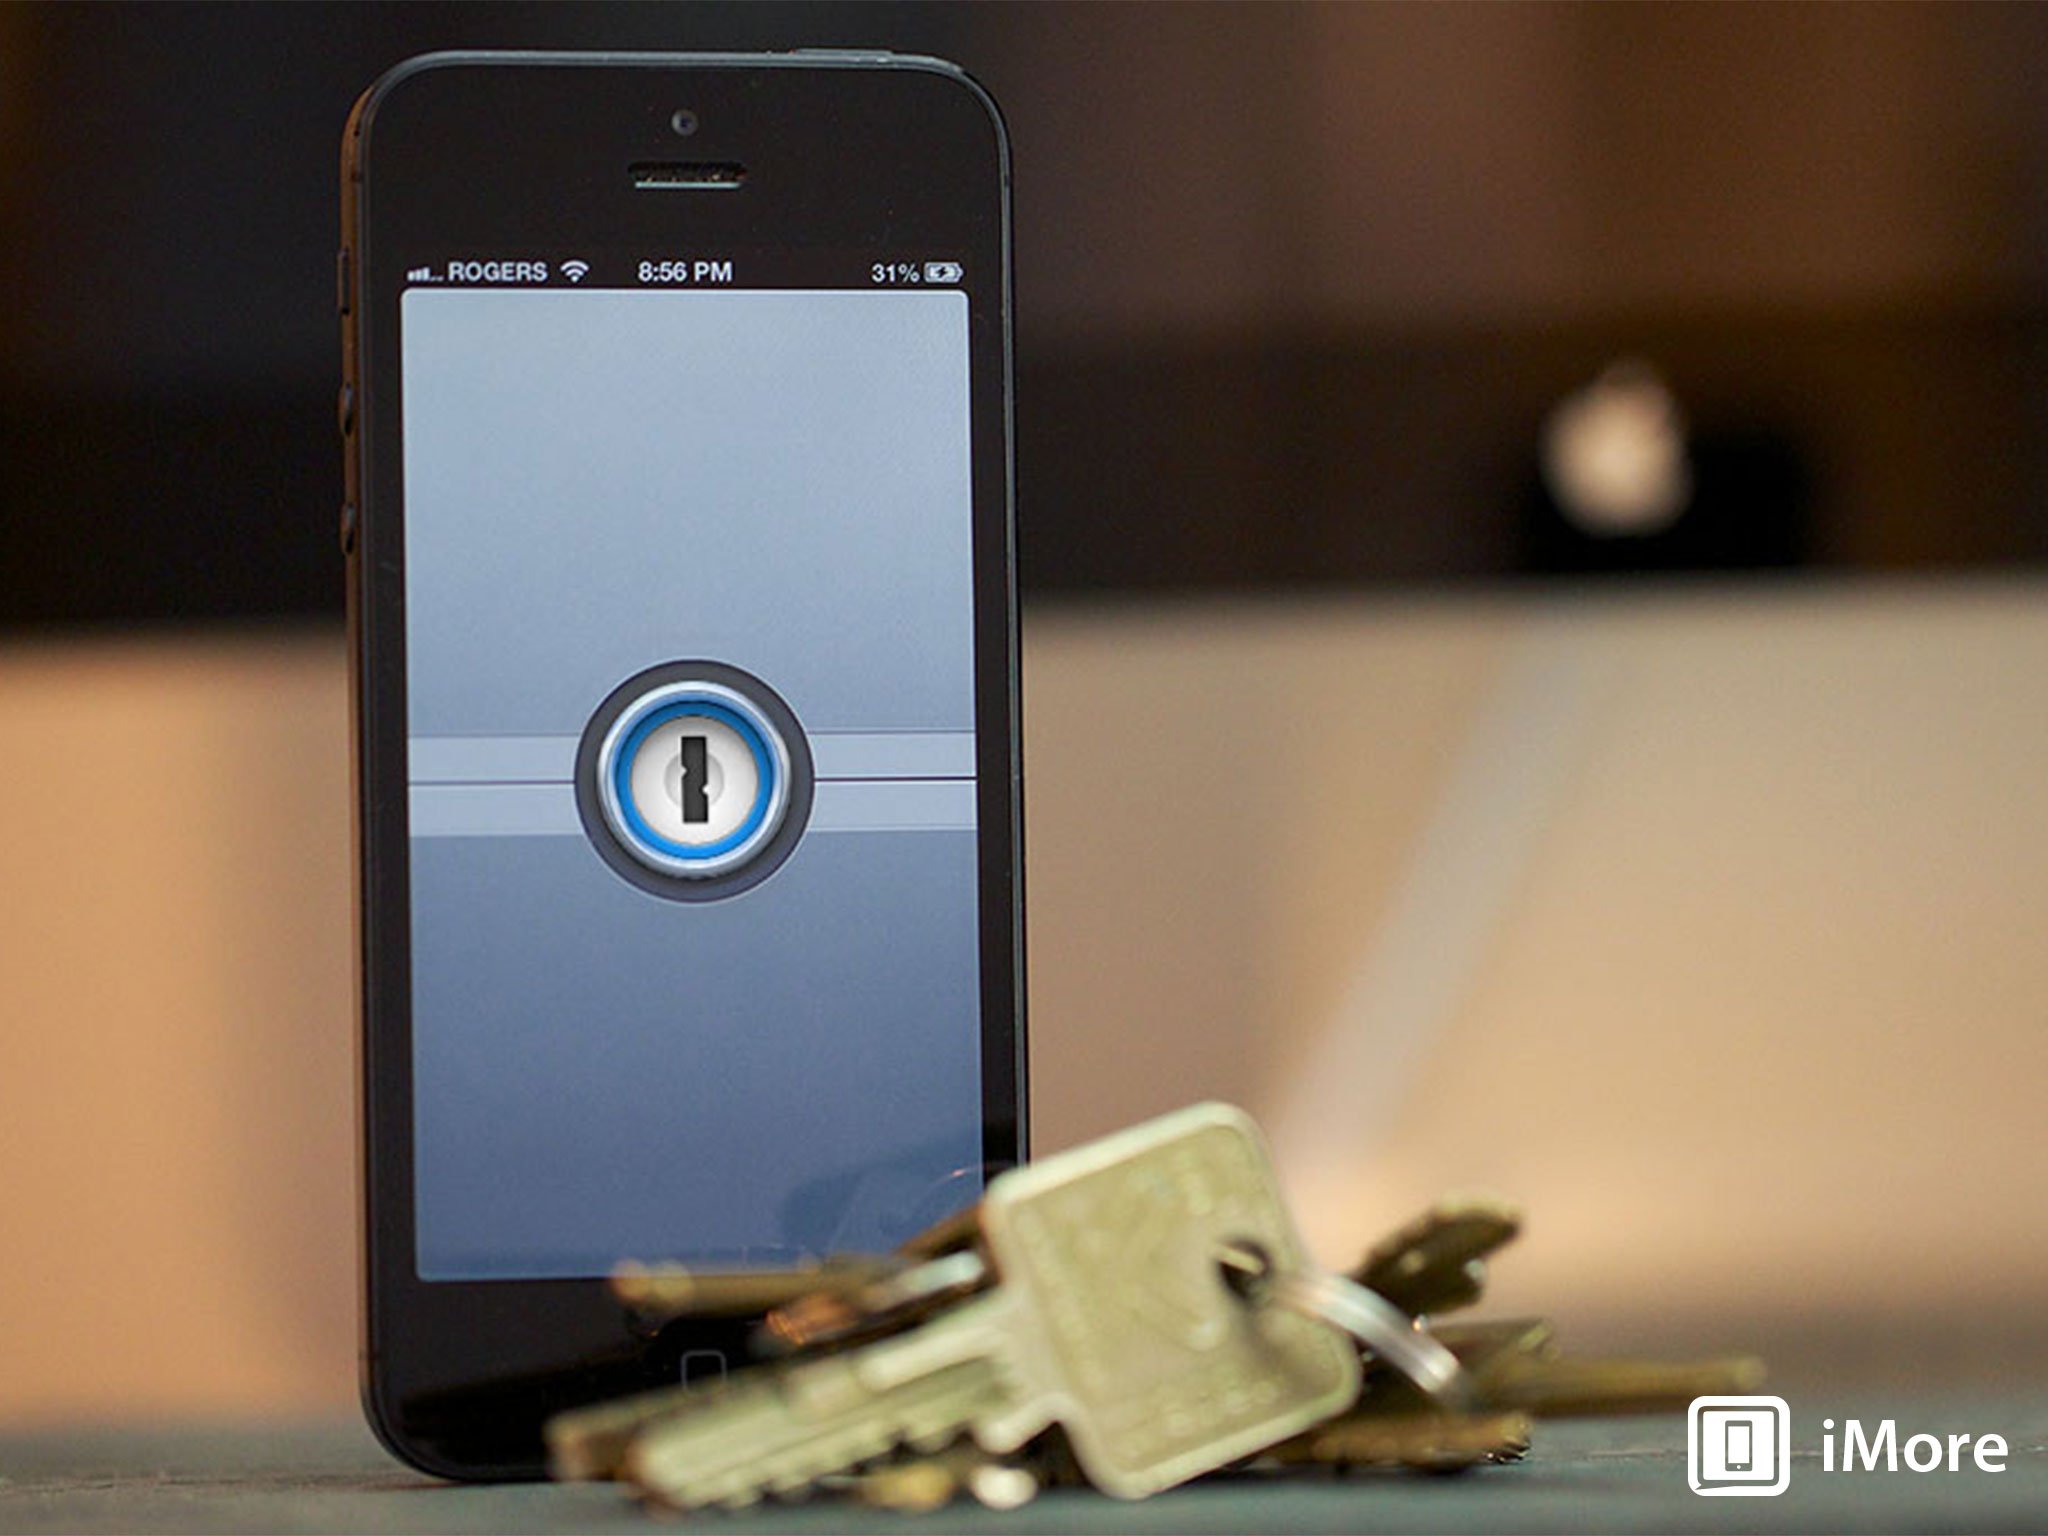 1Password for iOS adds Wi-Fi sync, more